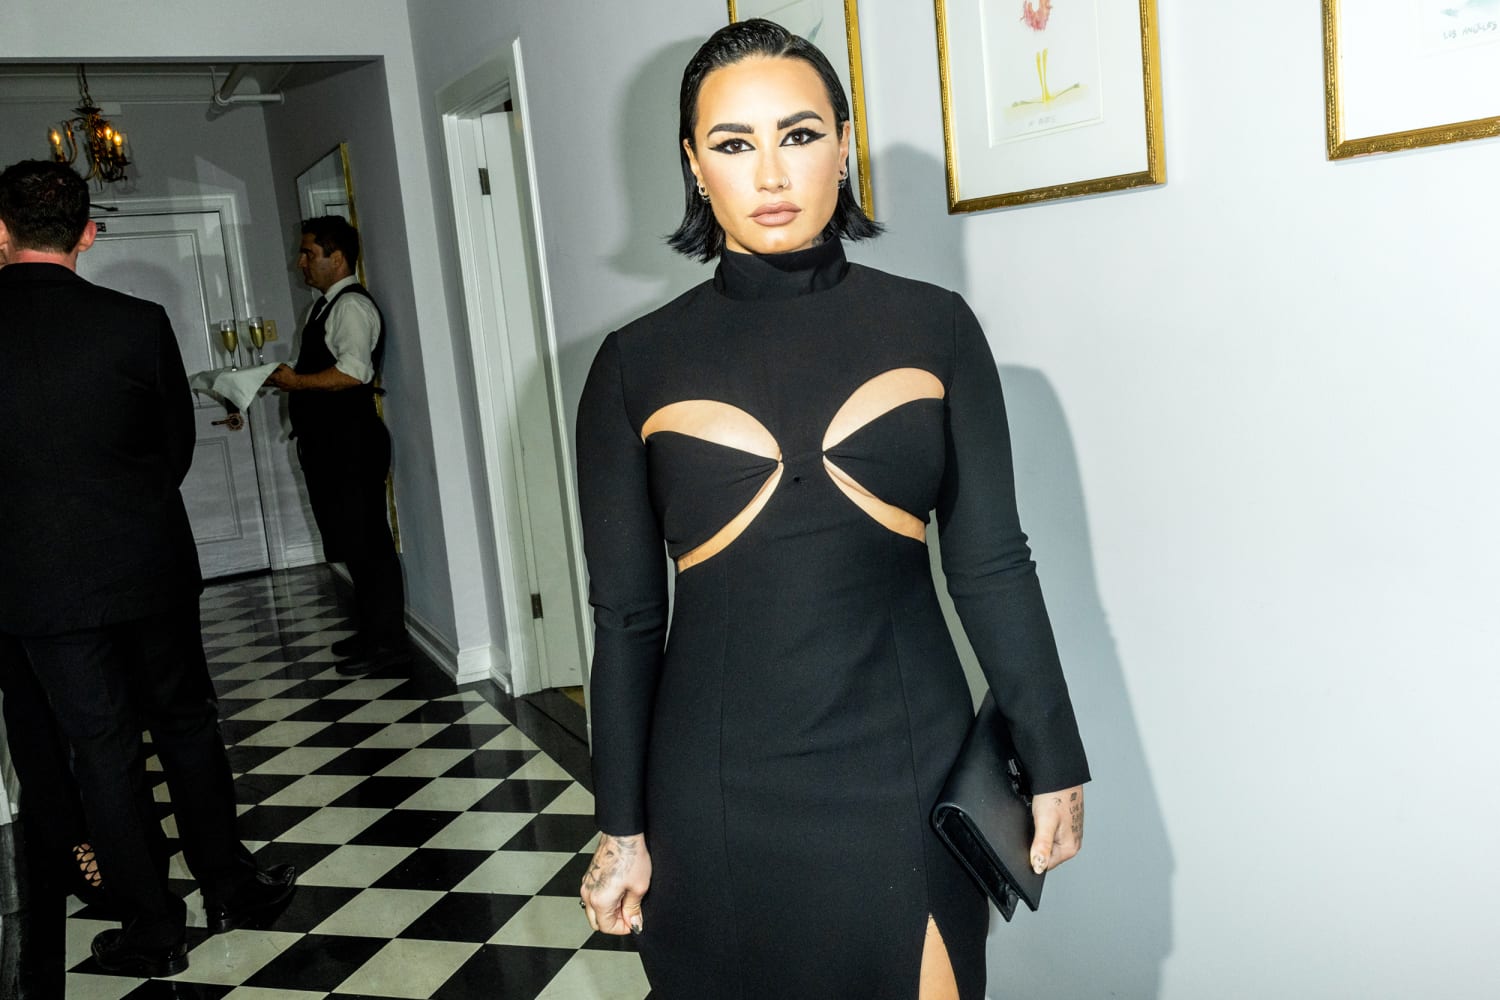 Demi Lovato opens up about pronouns, gendered bathrooms - Los Angeles Times